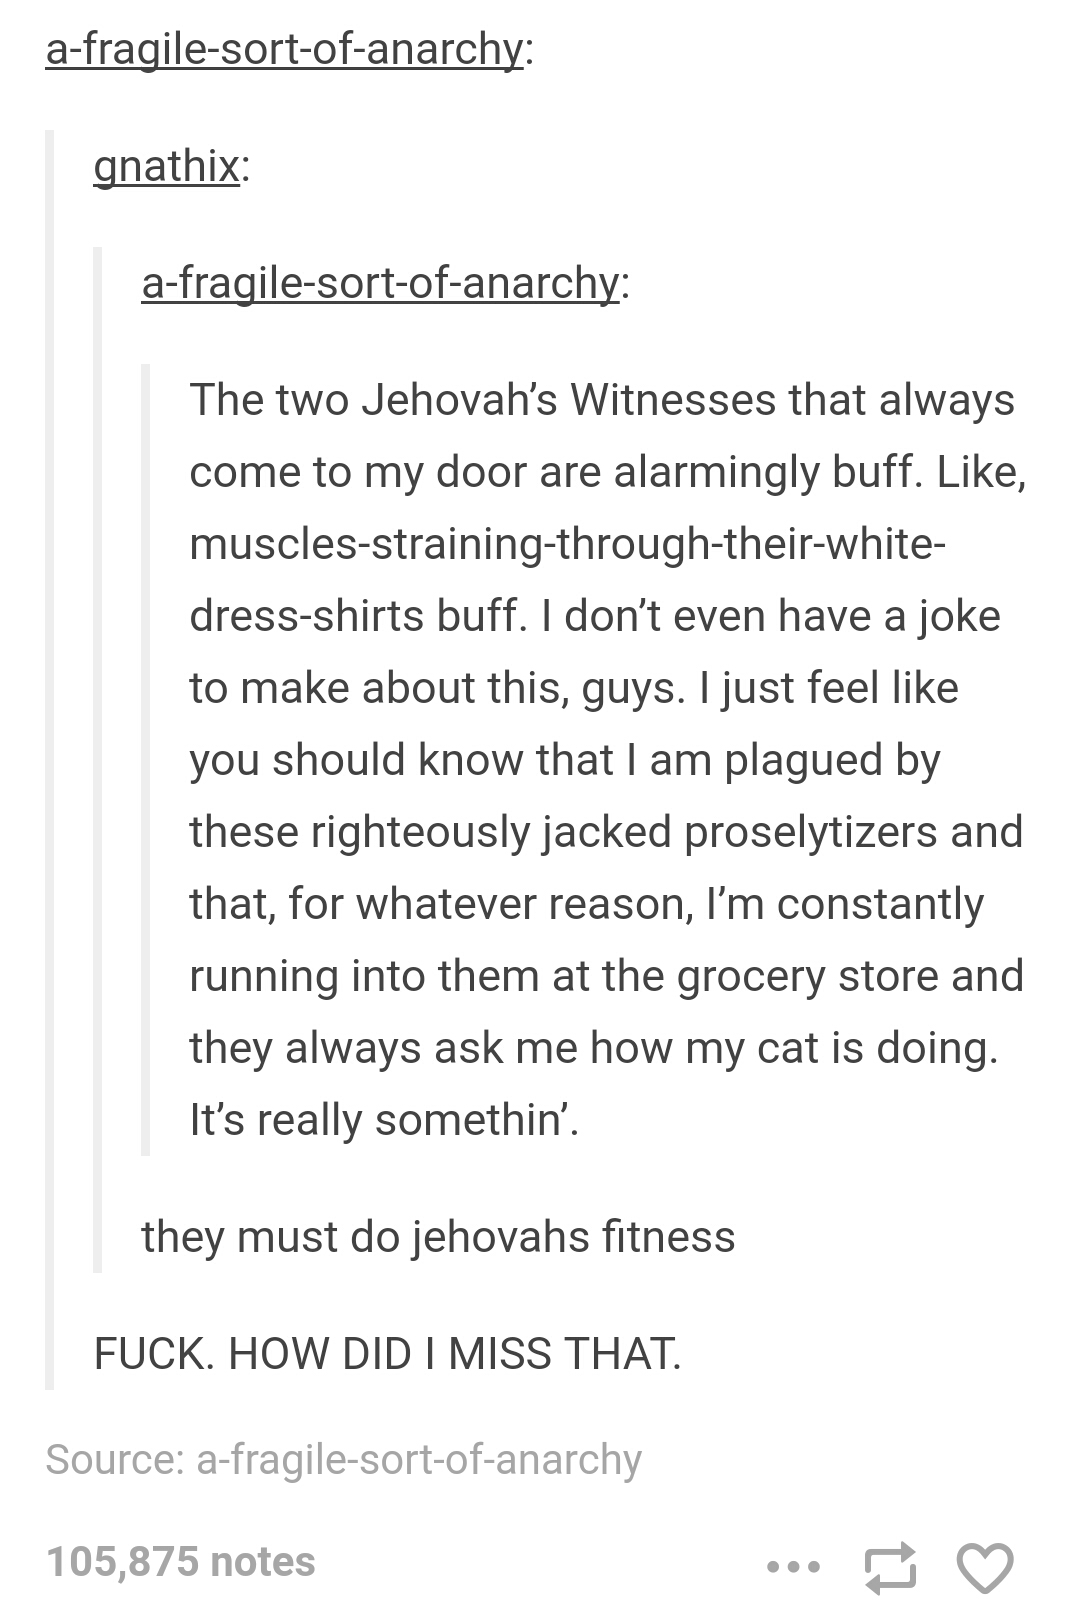 tumblr - best of tumblr 2017 - afragilesortofanarchy gnathix afragilesortofanarchy The two Jehovah's Witnesses that always come to my door are alarmingly buff. , musclesstrainingthroughtheirwhite dressshirts buff. I don't even have a joke to make about th